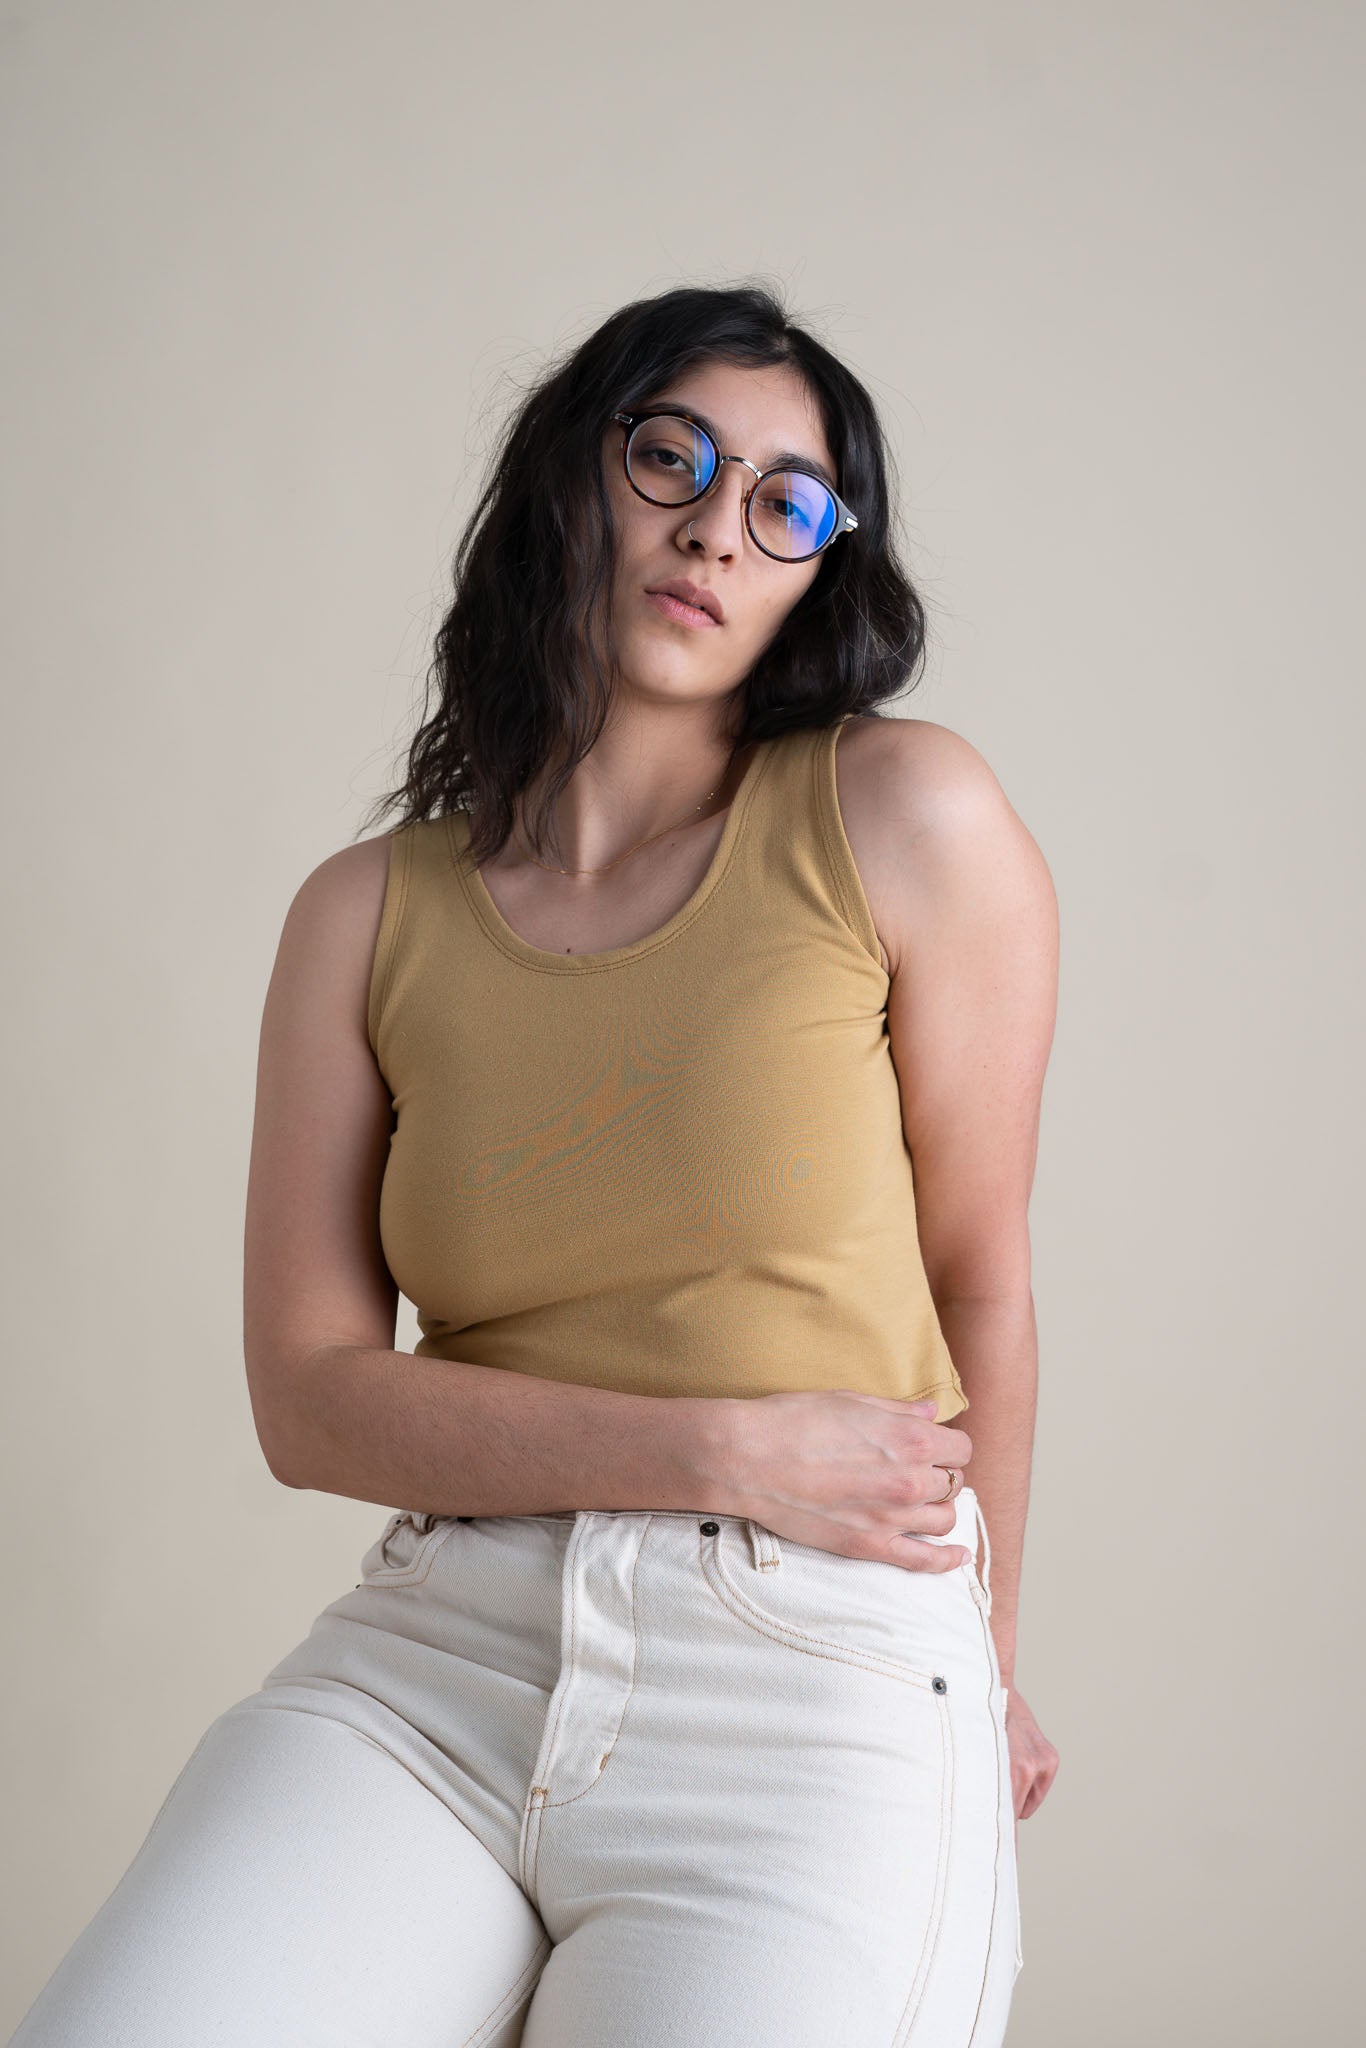 Lounge Shorts in Pistachio – Conscious Clothing